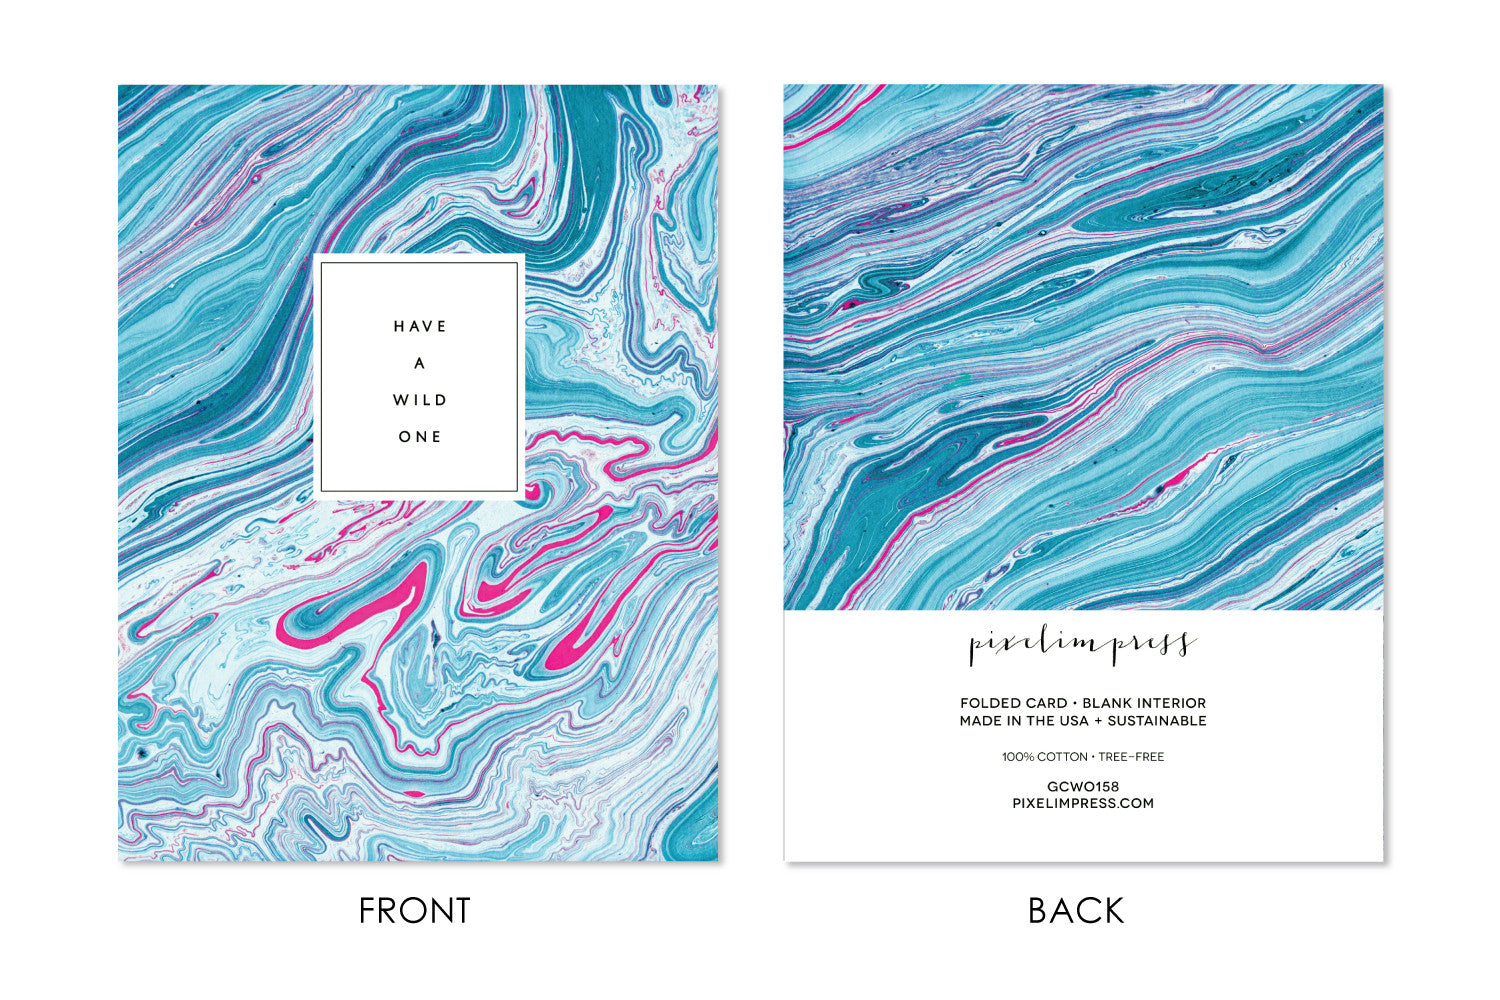 HAVE A WILD ONE Turquoise and Pink Marble front + back Greeting Card by pixelimpress